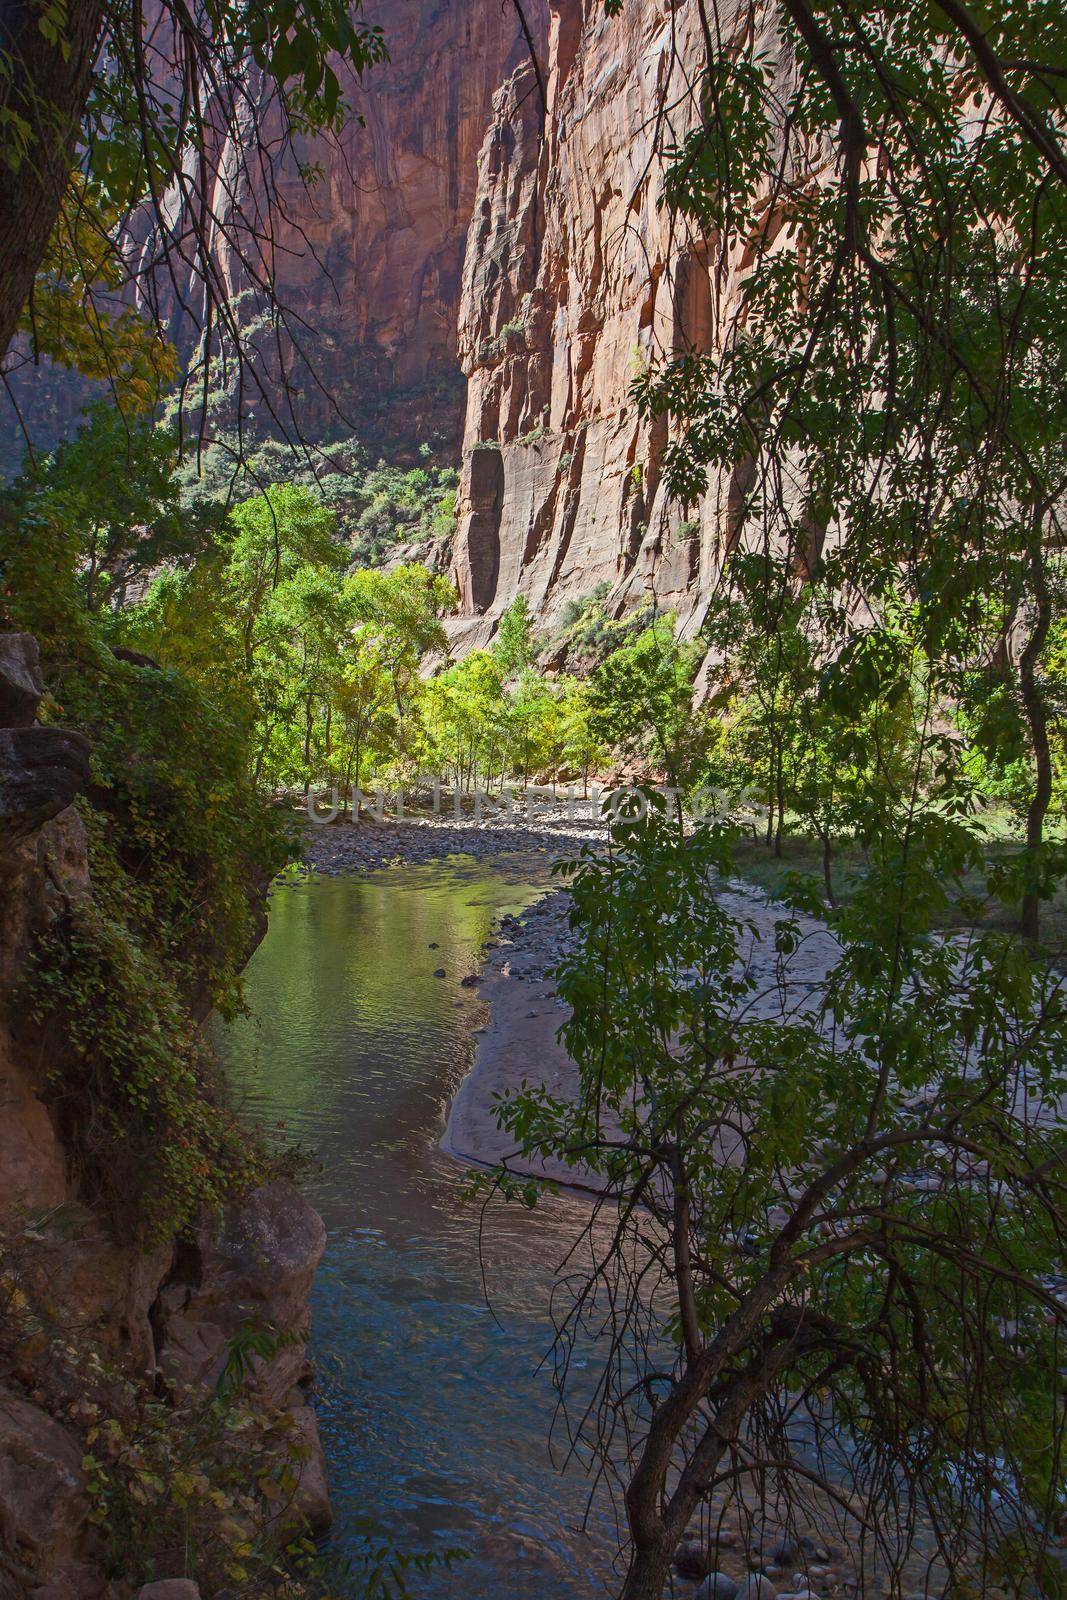 Virgin River Zion National Park 2610 by kobus_peche